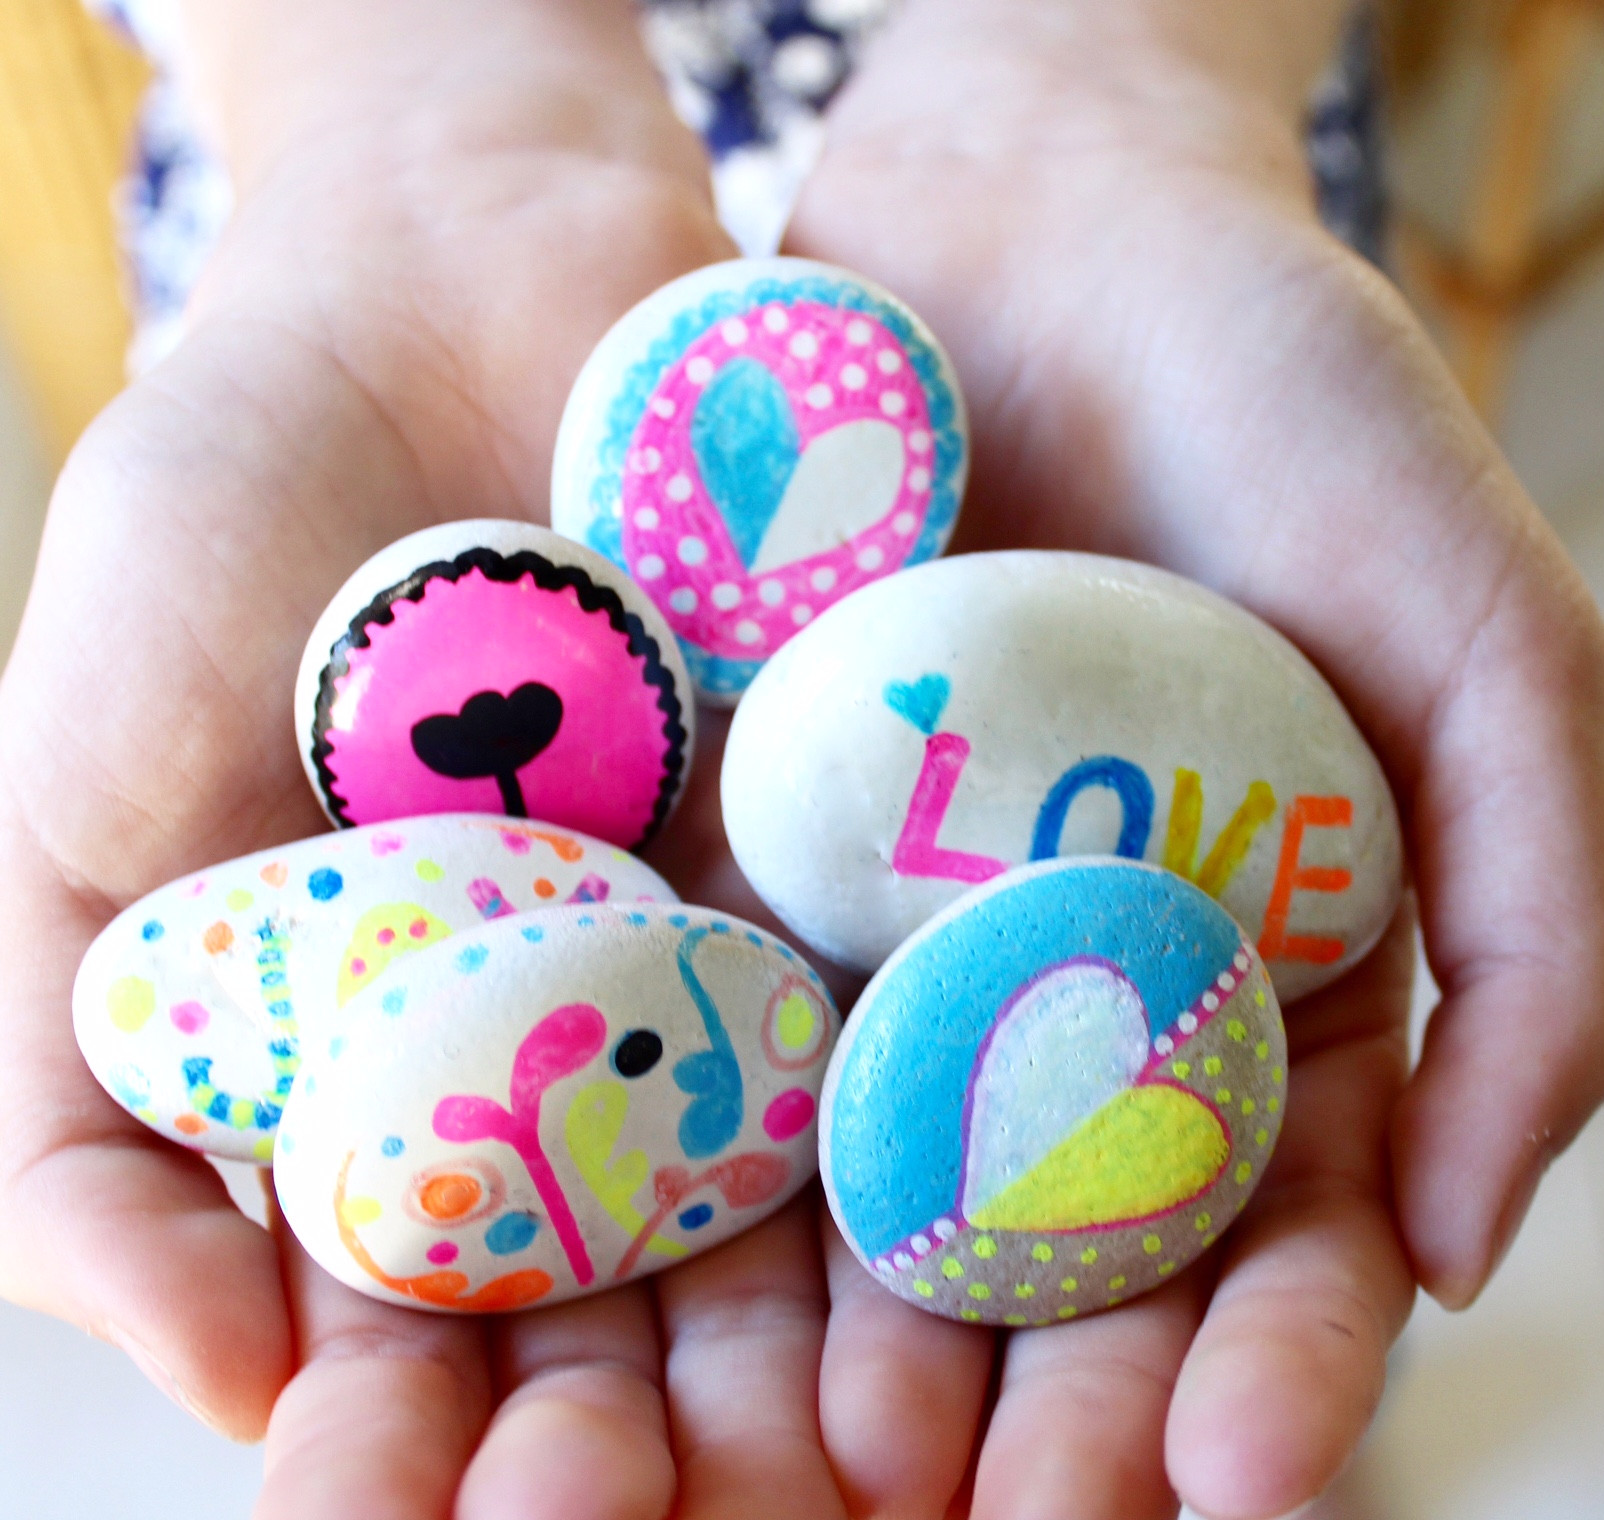 Paint Ideas For Toddlers
 Rock Painting Ideas for Kids